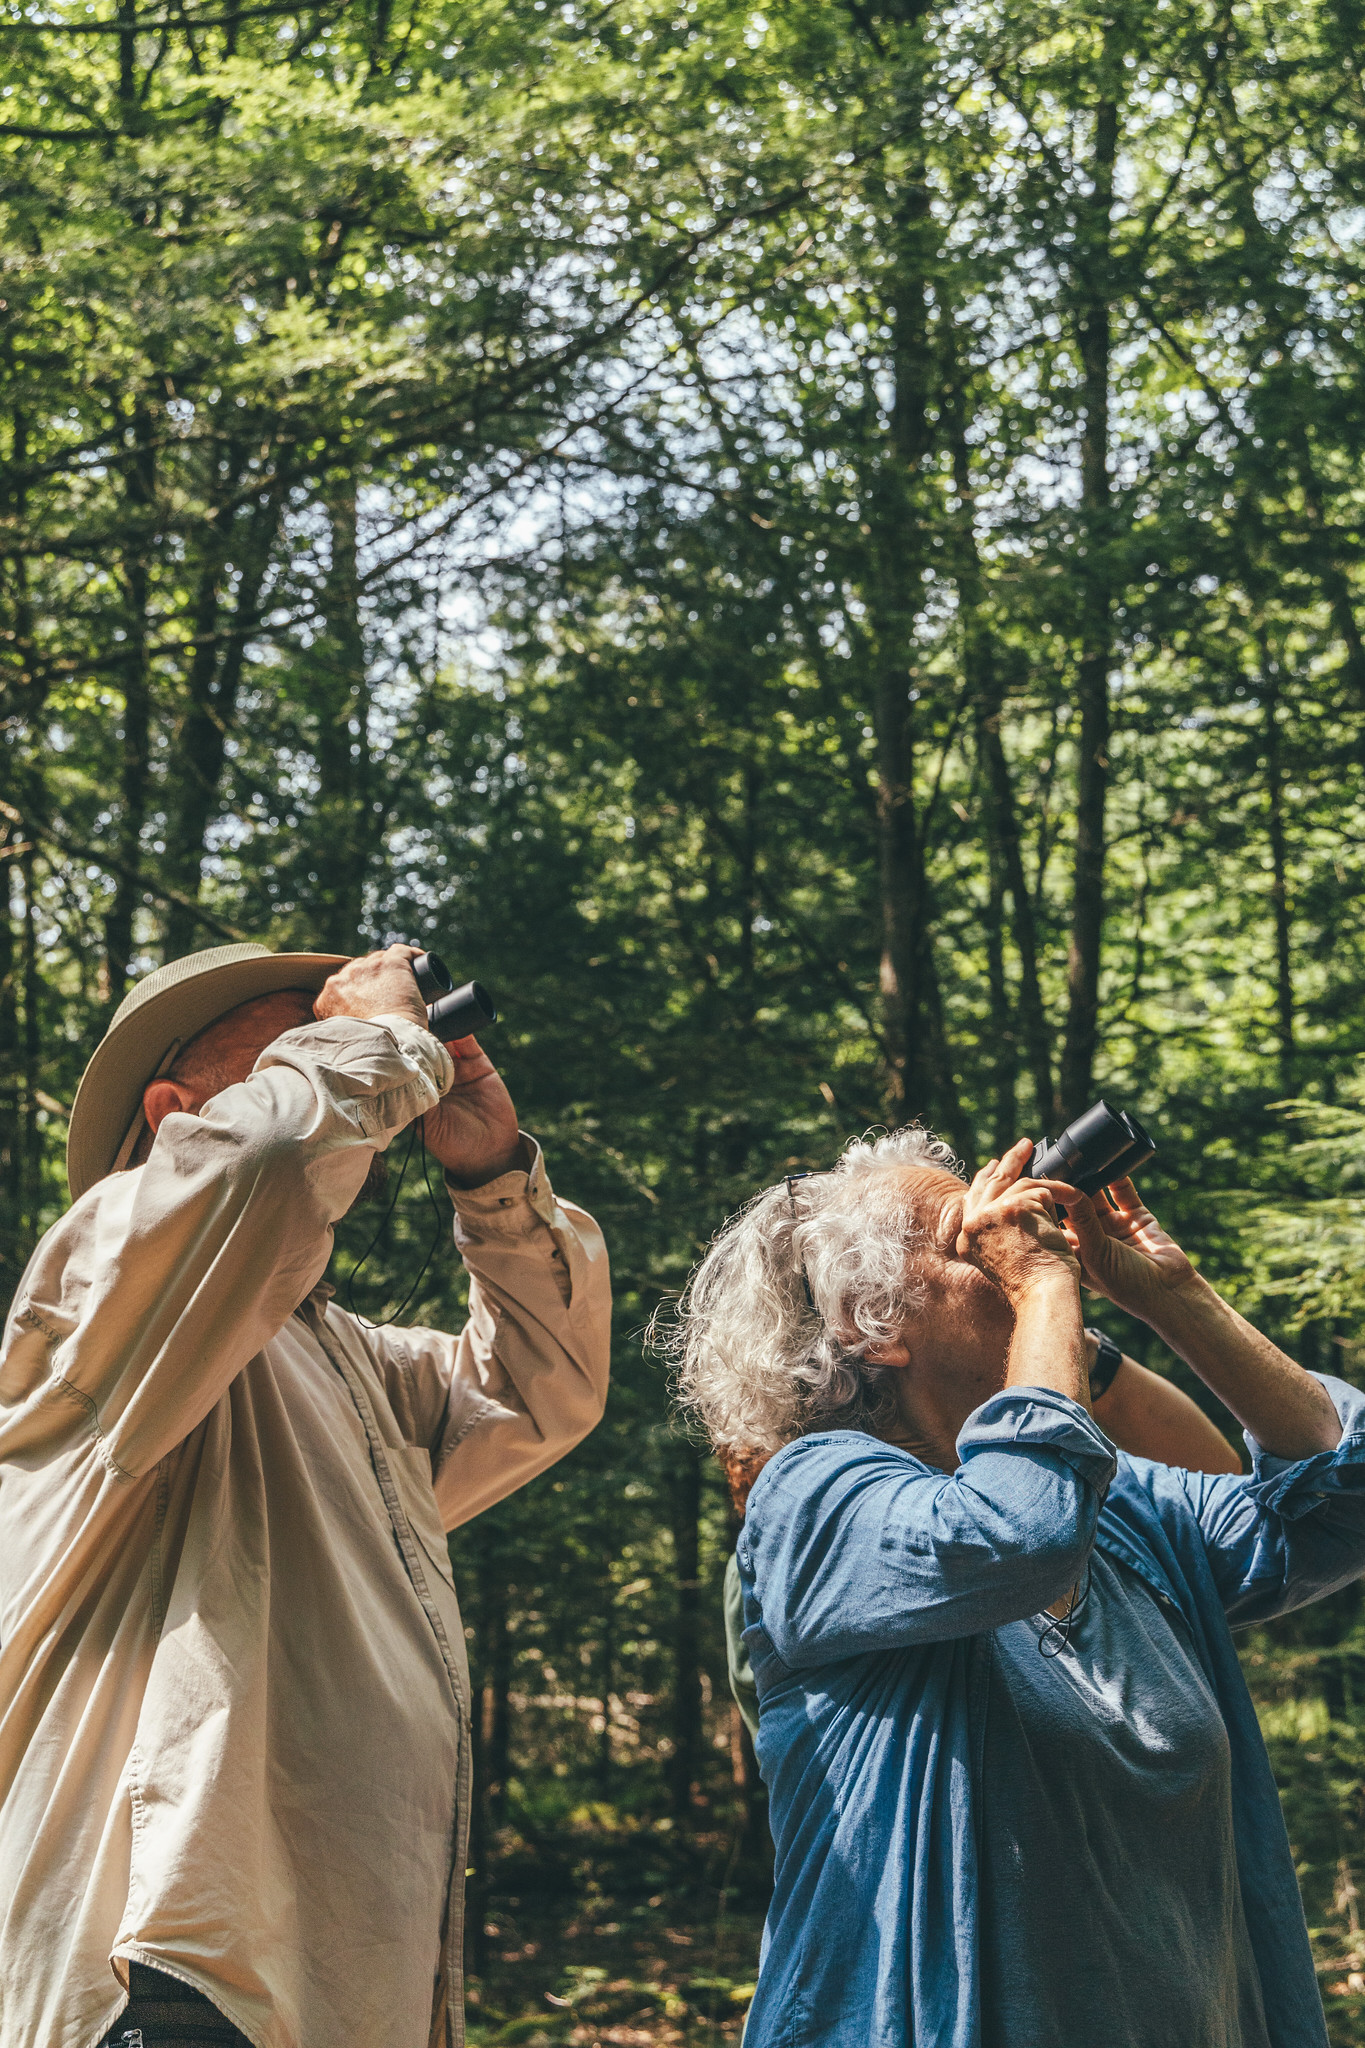 Two New York forest landowners, one man and one woman, look through their binoculars